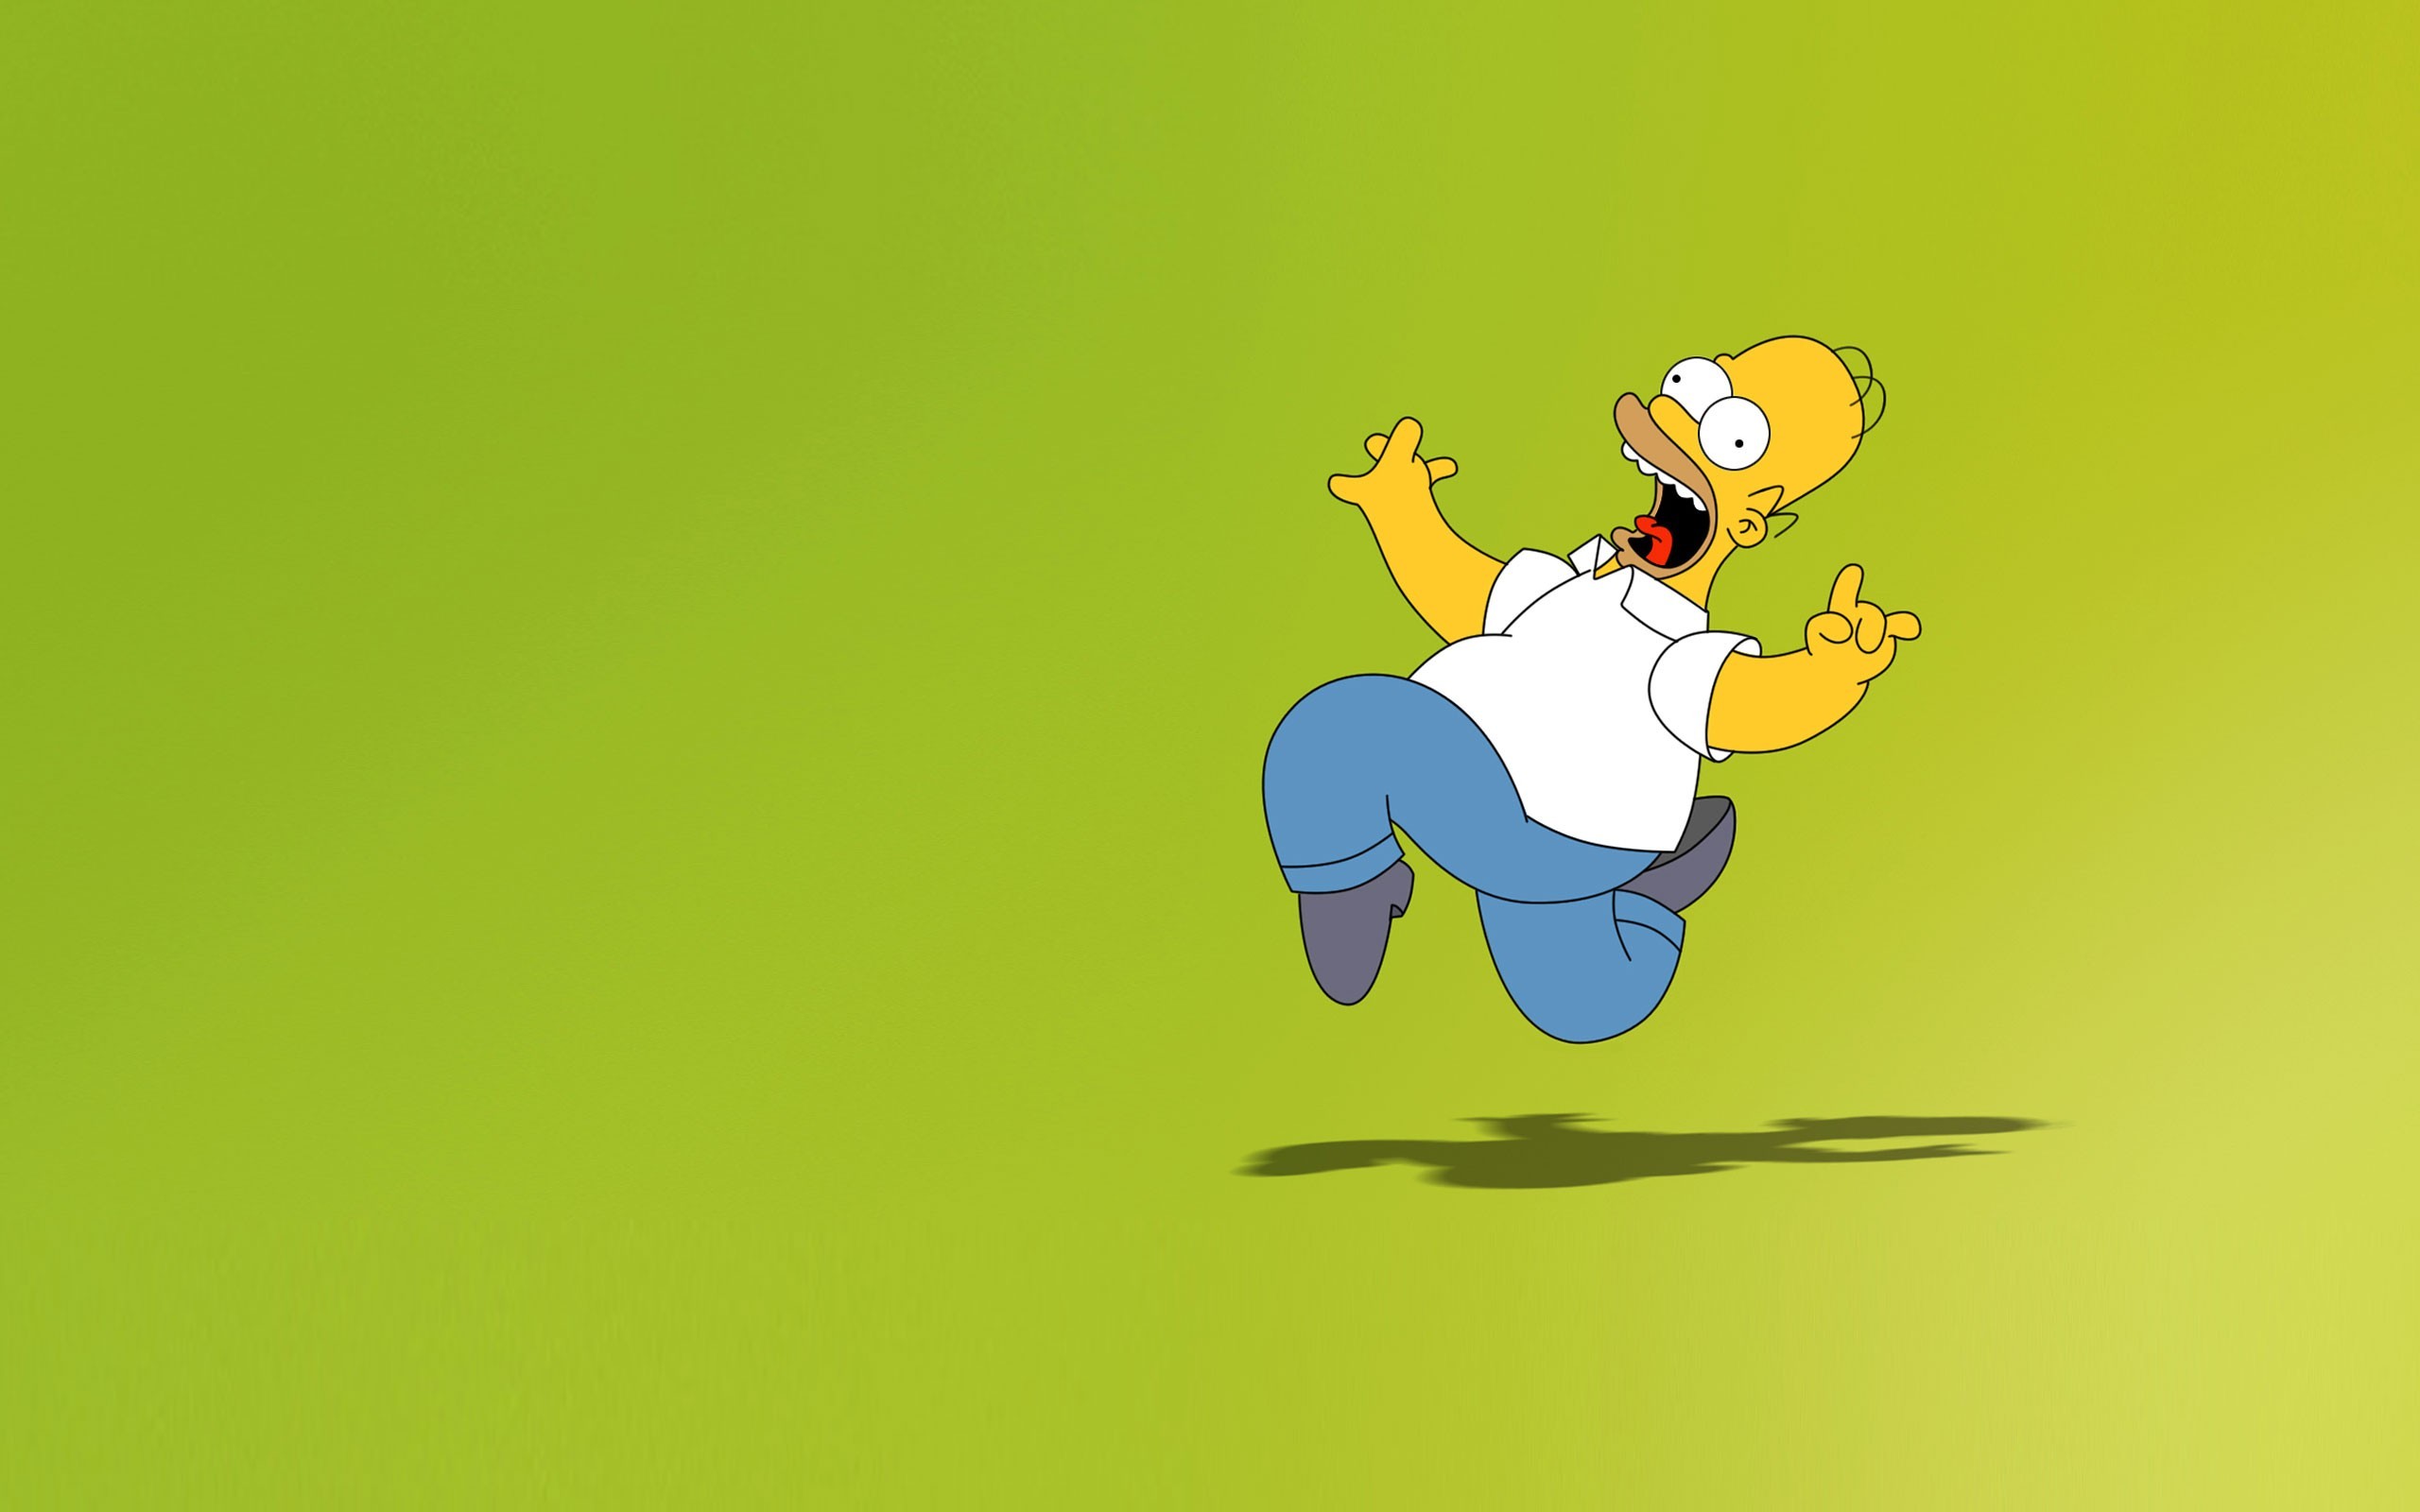 simpsons wallpaper background green